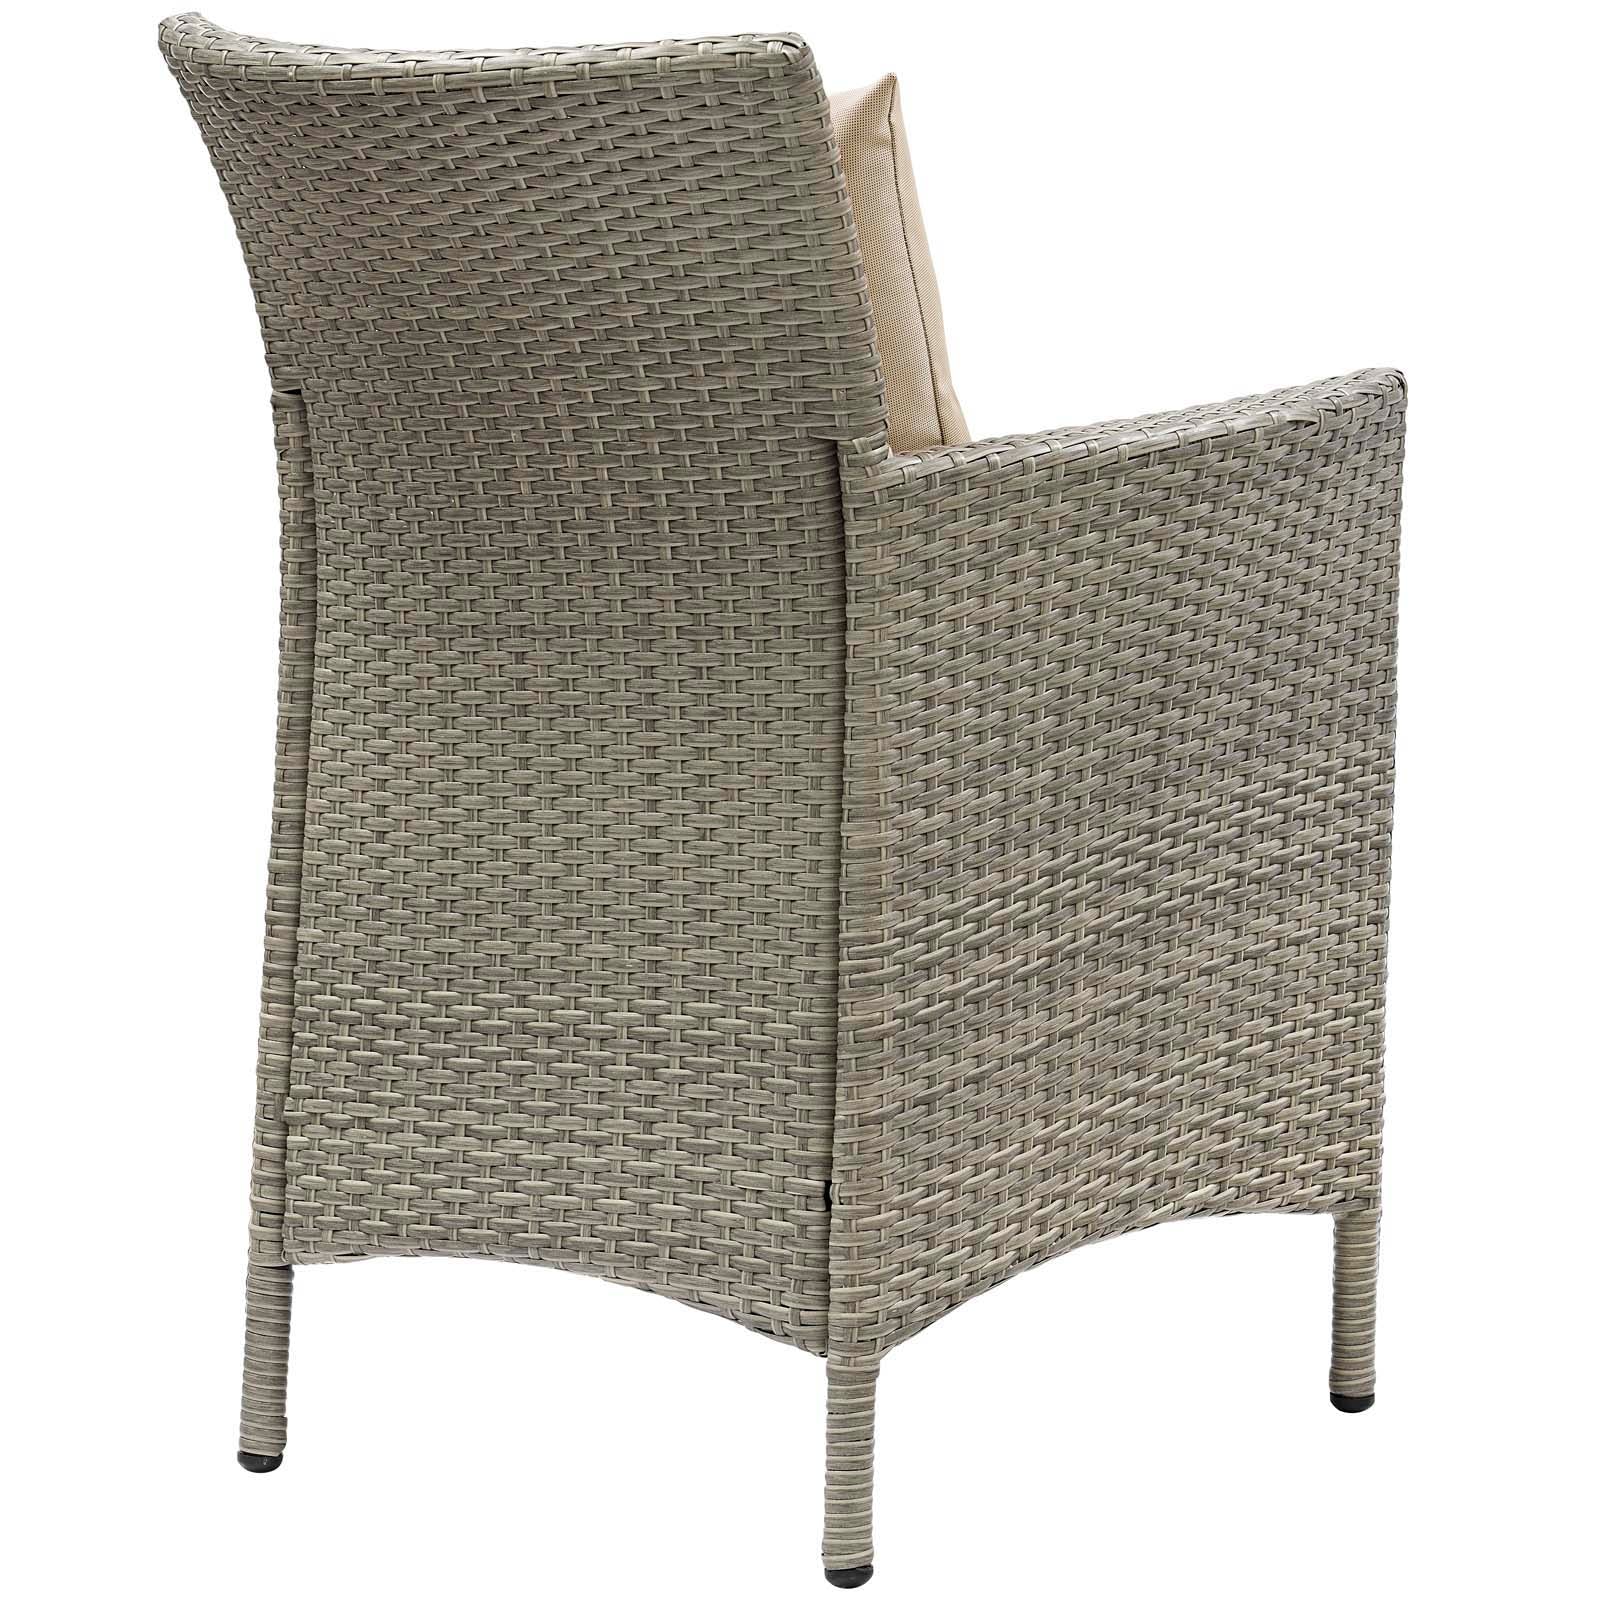 Modway Outdoor Dining Chairs - Conduit Outdoor Patio Wicker Rattan Dining Armchair Set of 2 Light Gray Beige